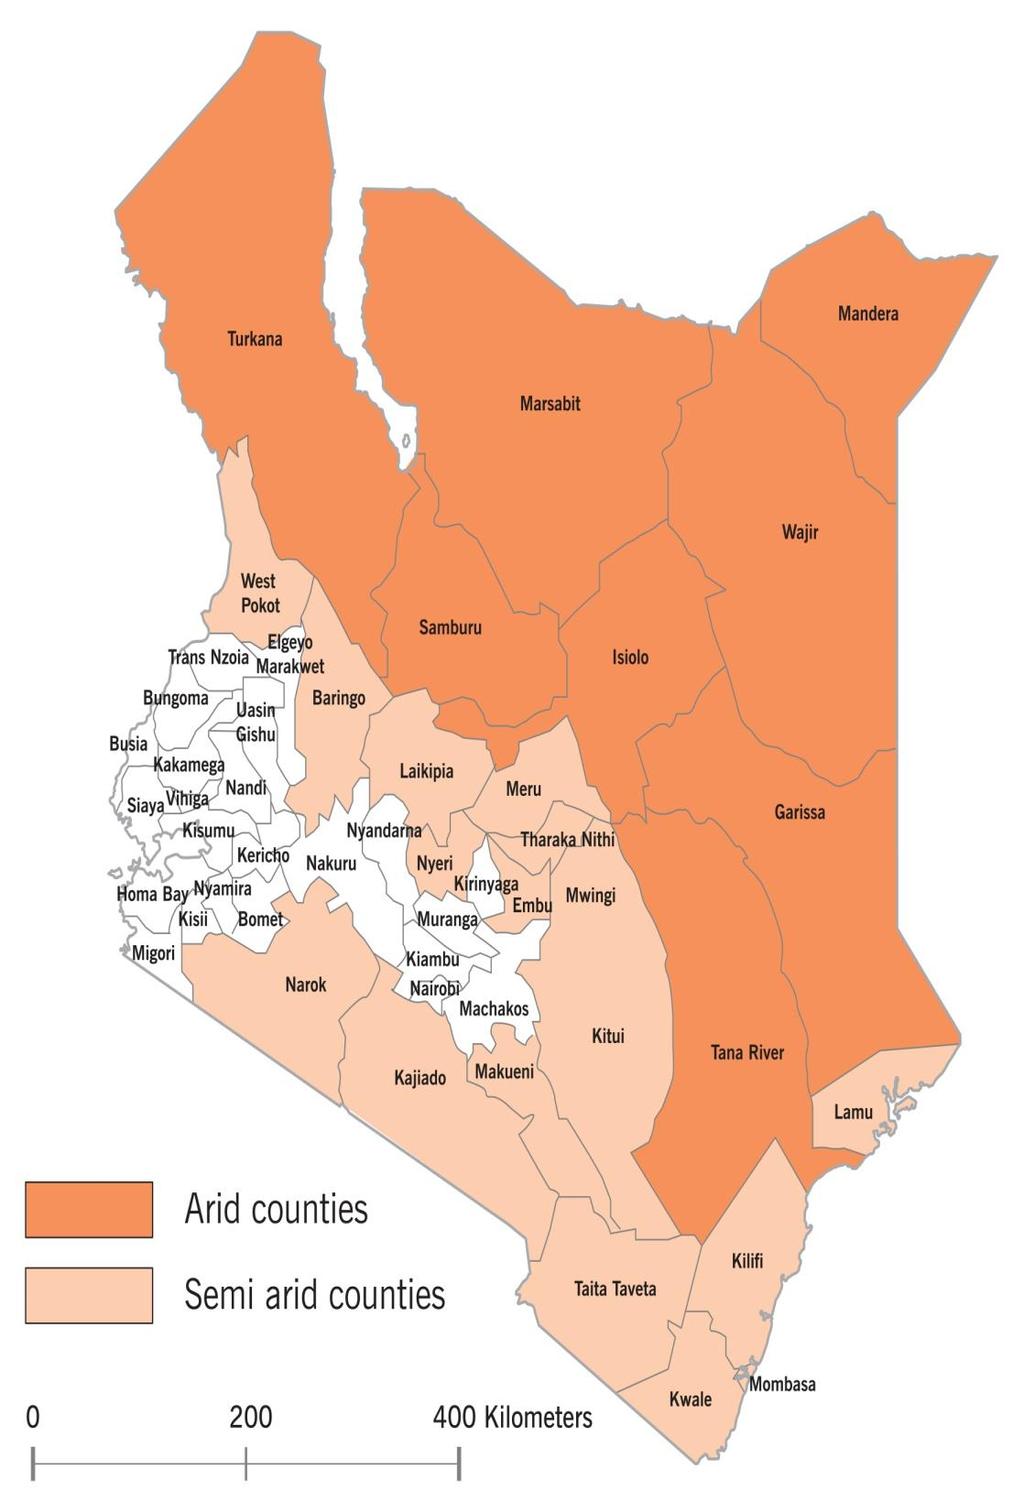 An overview -Kenya REPUBLIC OF KENYA An overview -Kenya Population 38.3 million Area : 580,367 sq metres Per capita income US 630 Education receives 6.6 % of GDP Education Literacy rate -61.